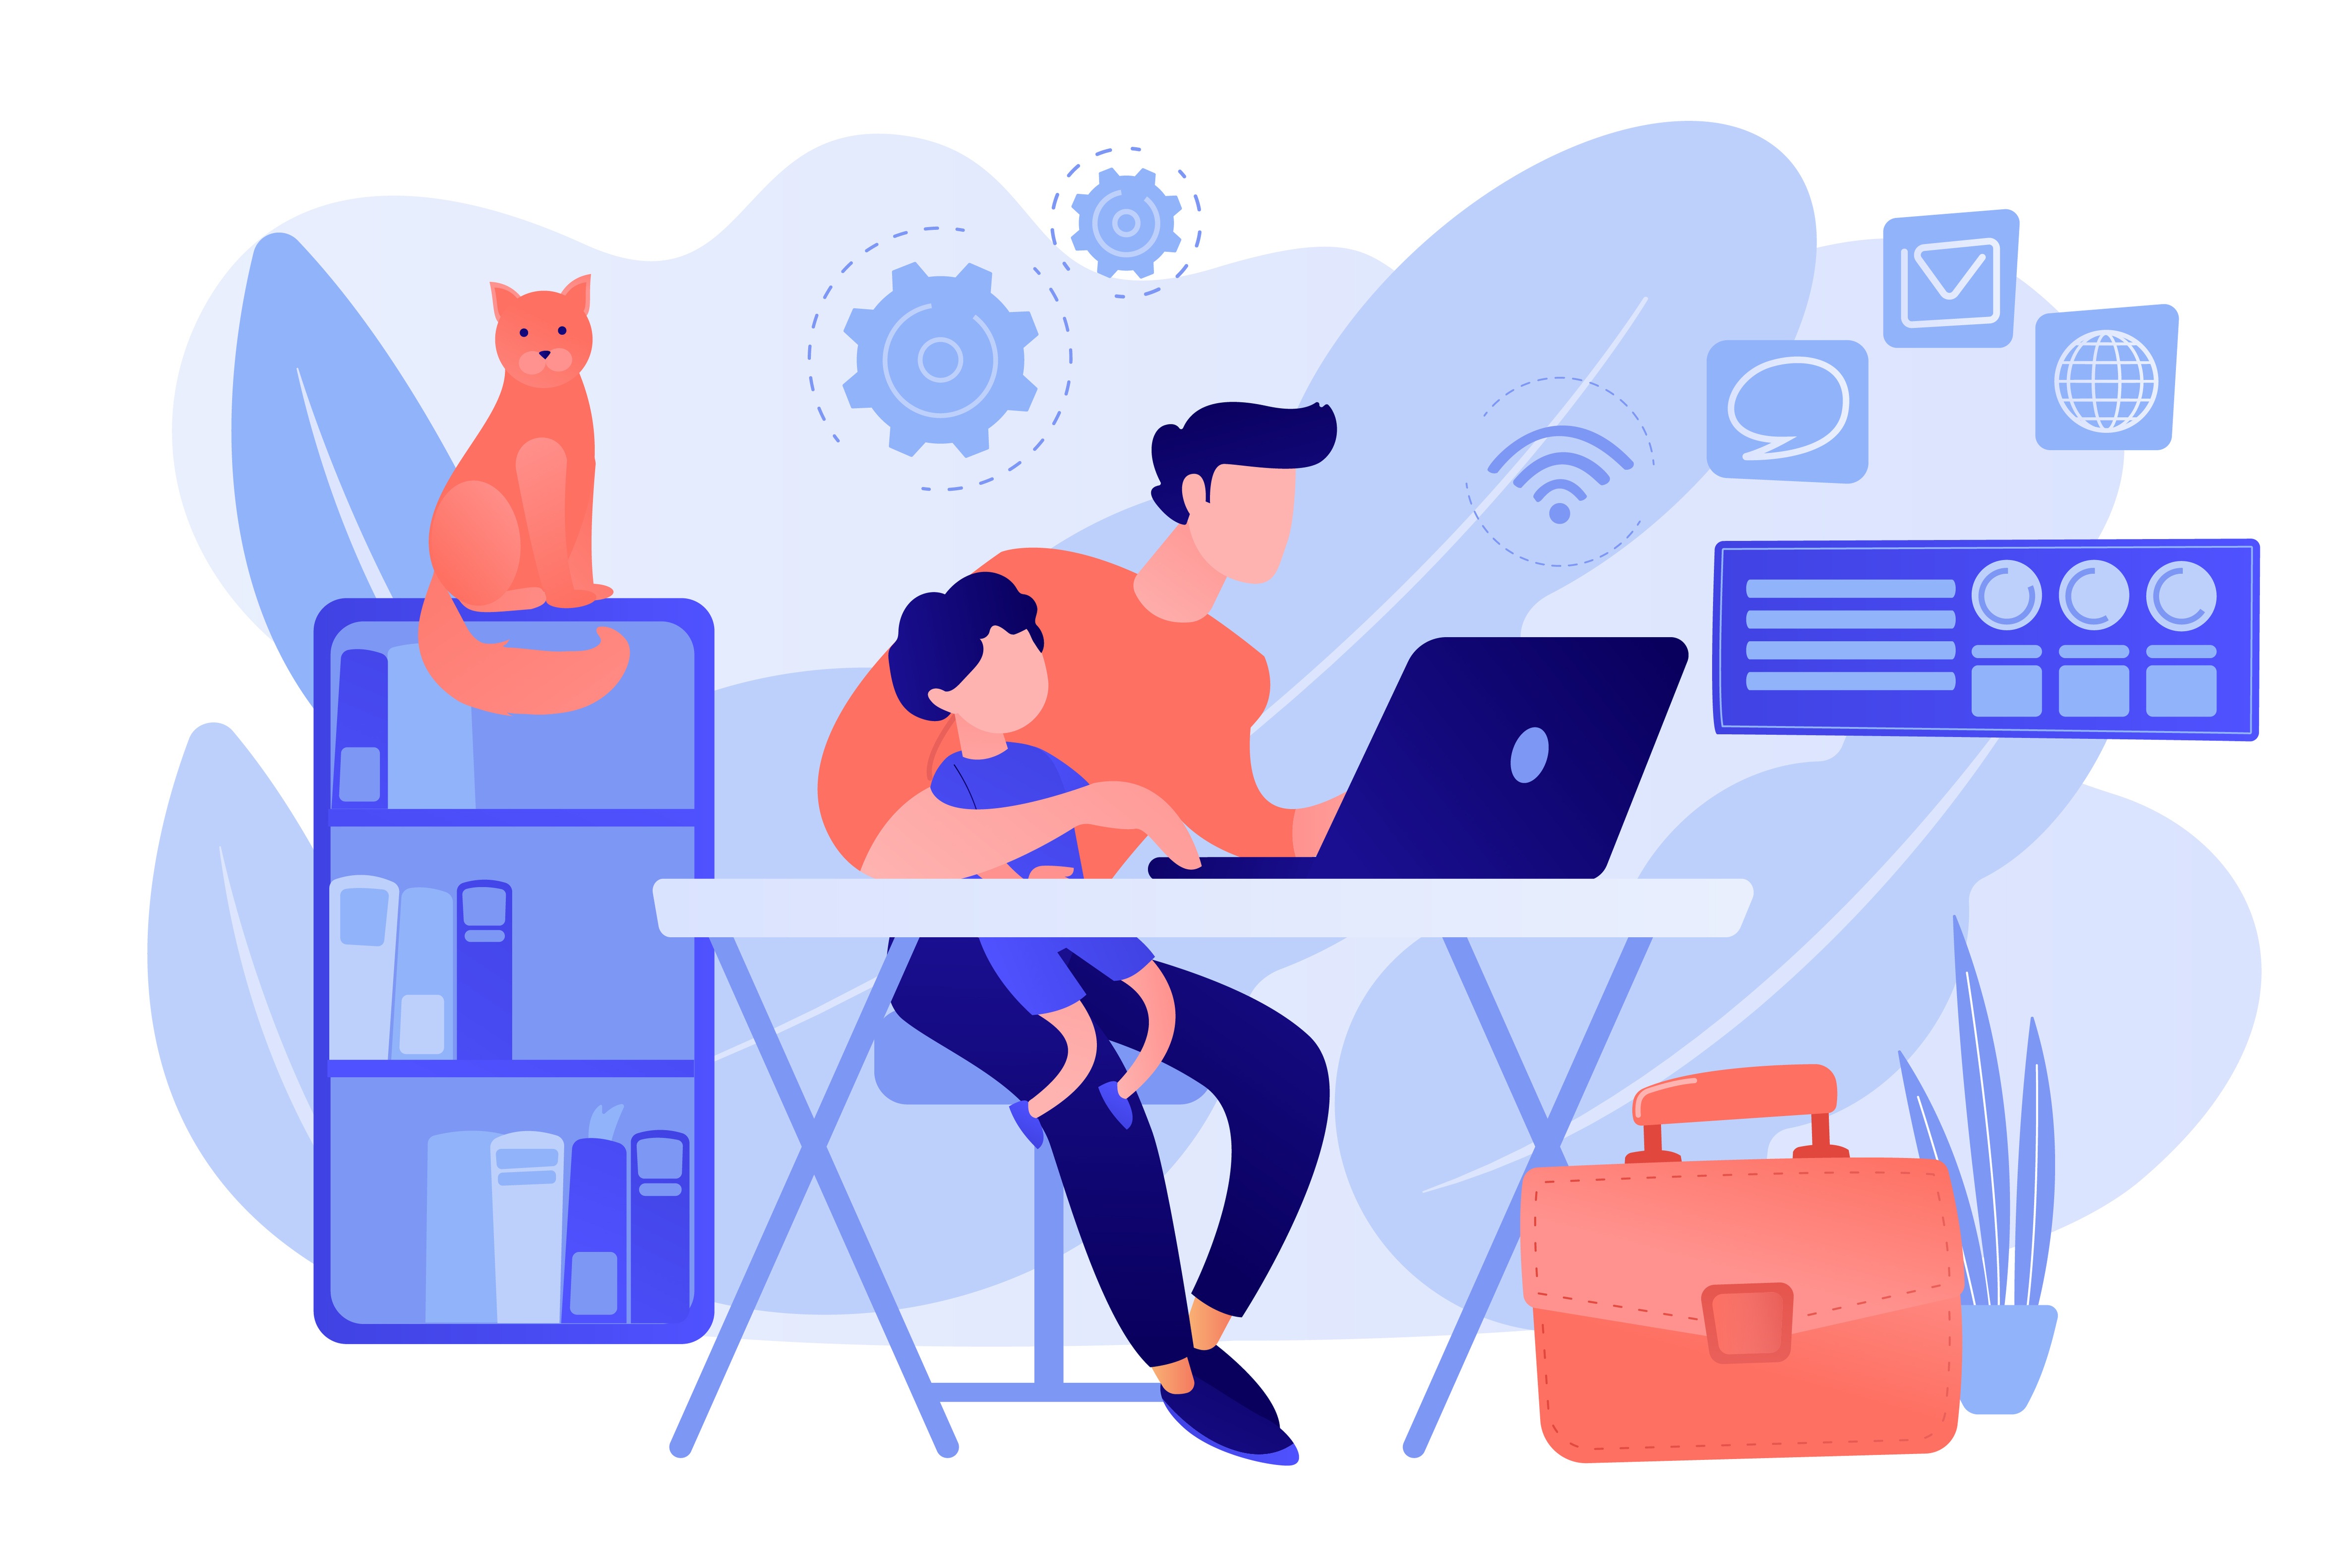 Freelancer with child working on laptop. Parent working with son. Home office. Remote worker, employee schedule, flexible schedule concept. Pink coral blue vector isolated illustration demonstrating flexible working with Microsoft 365.